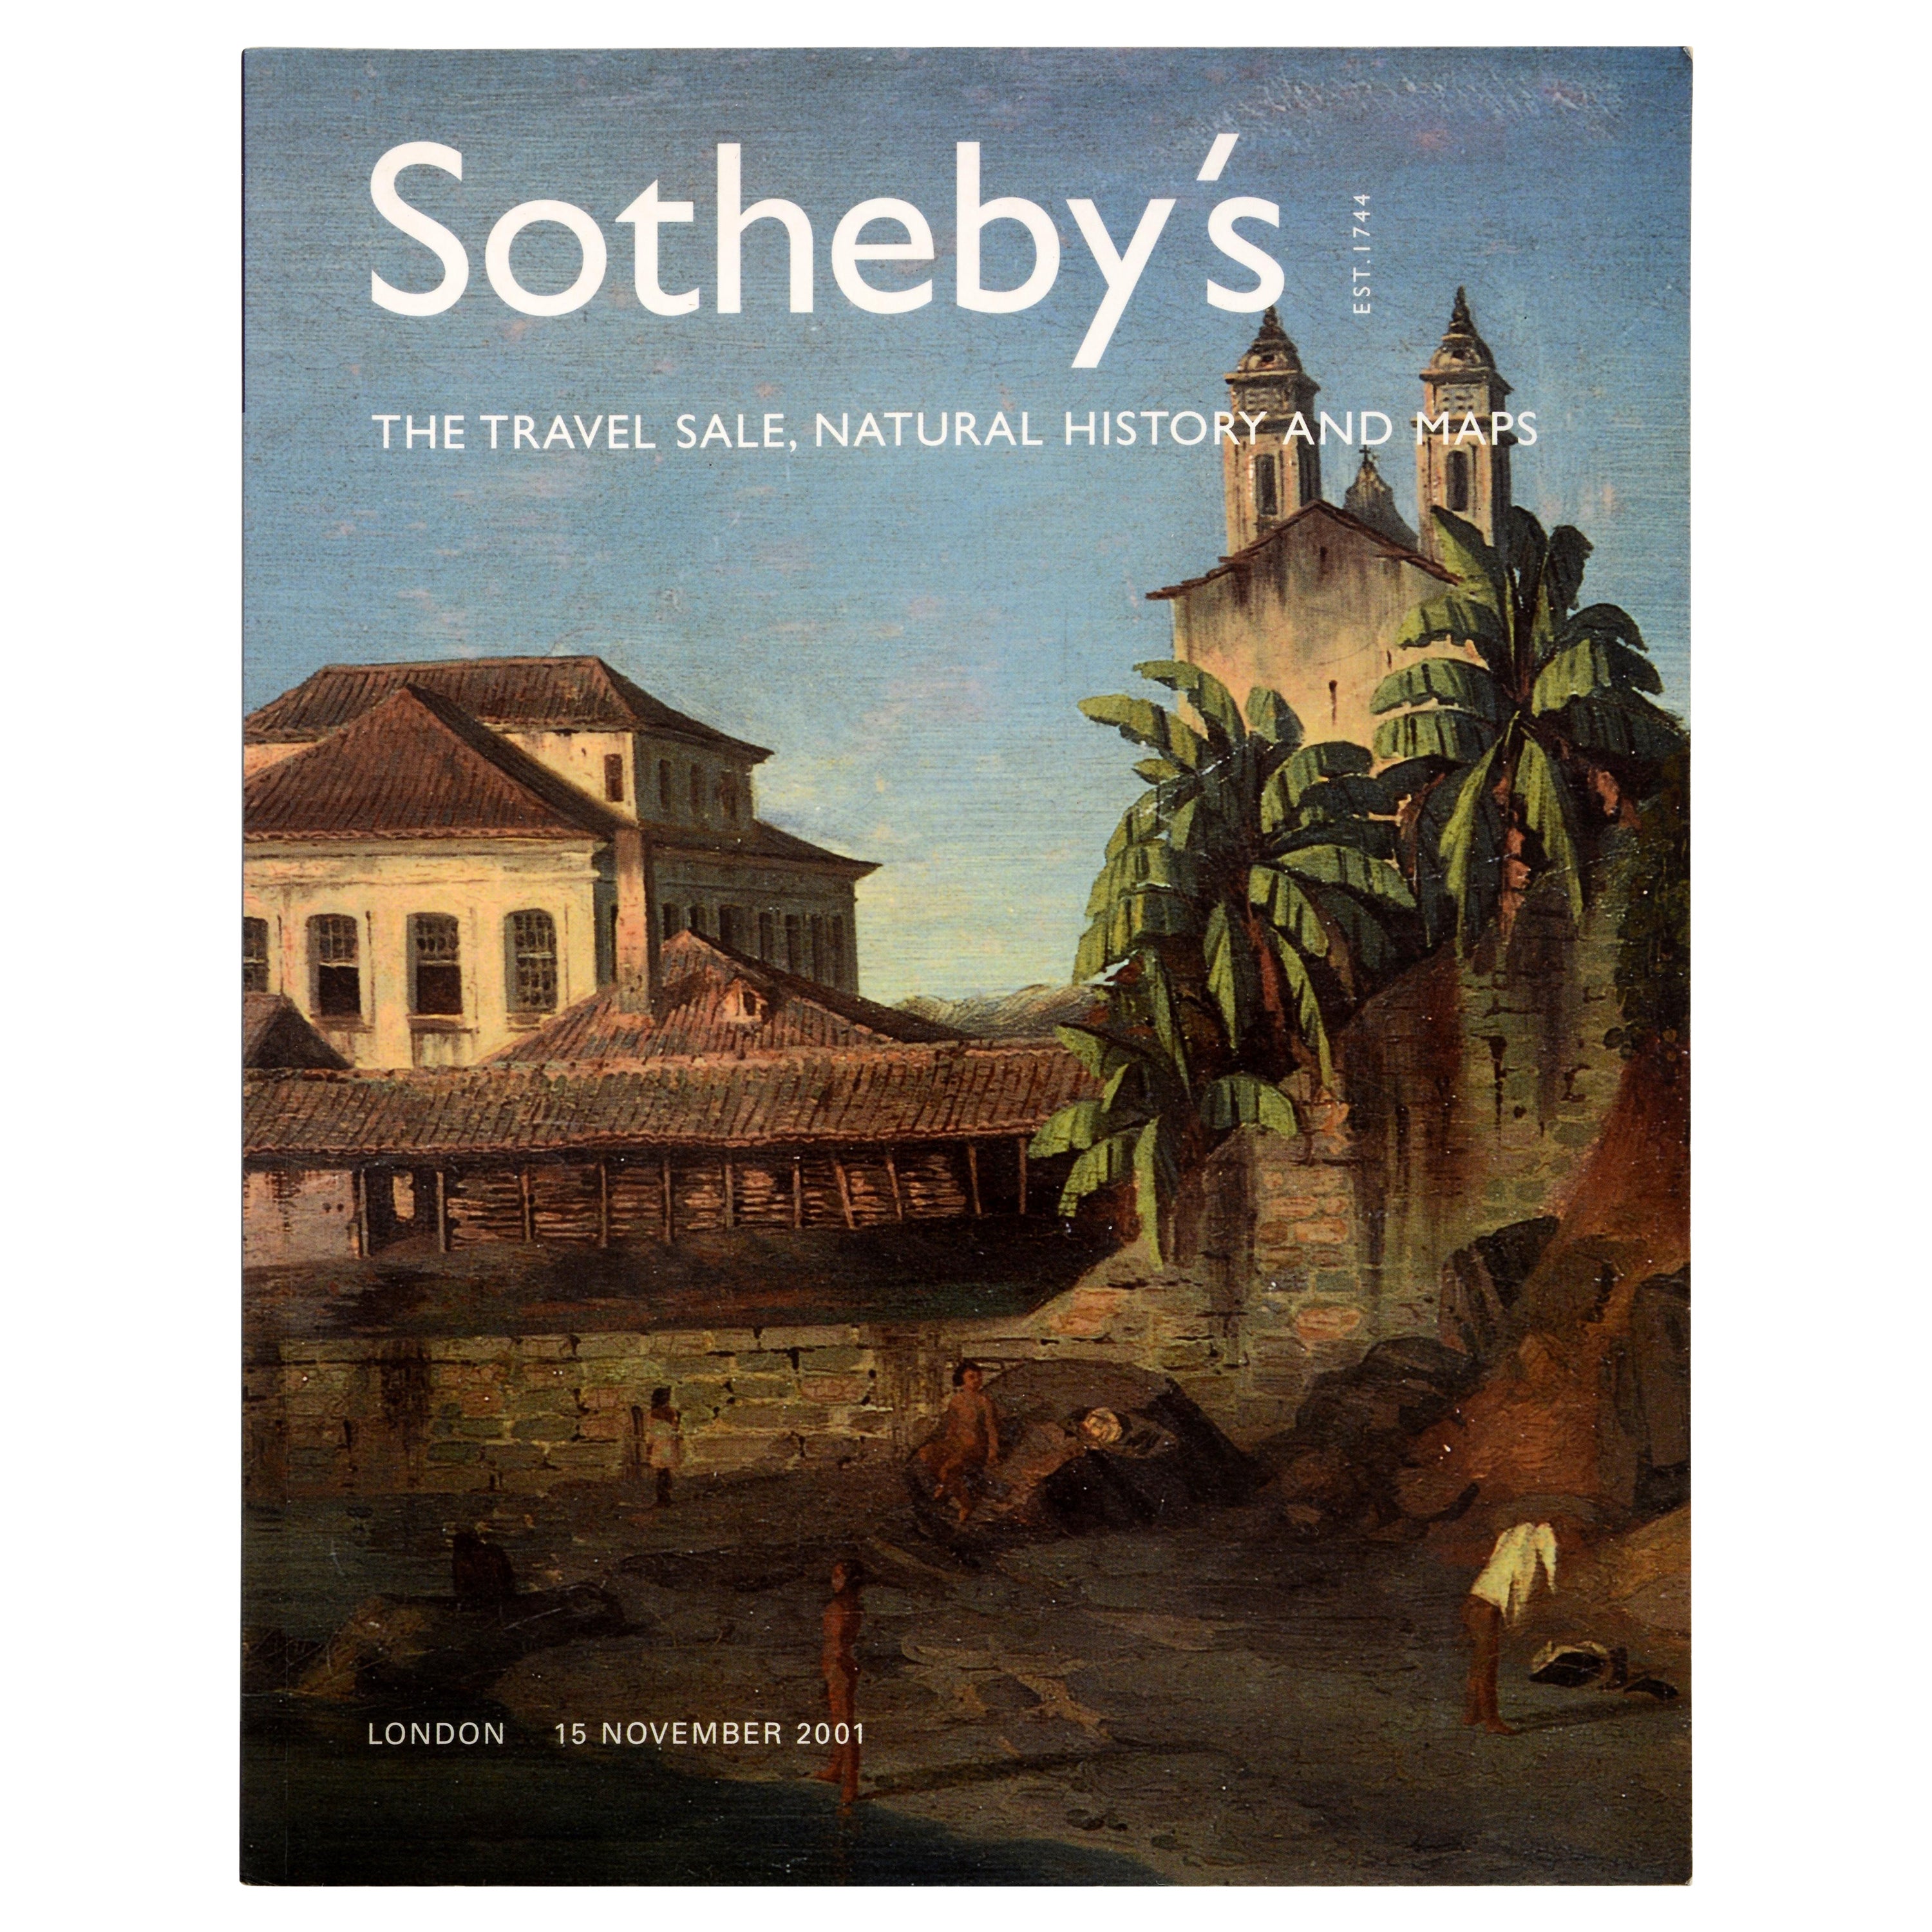 The Travel Sale: Natural History and Maps. November 2001: Sotheby's London